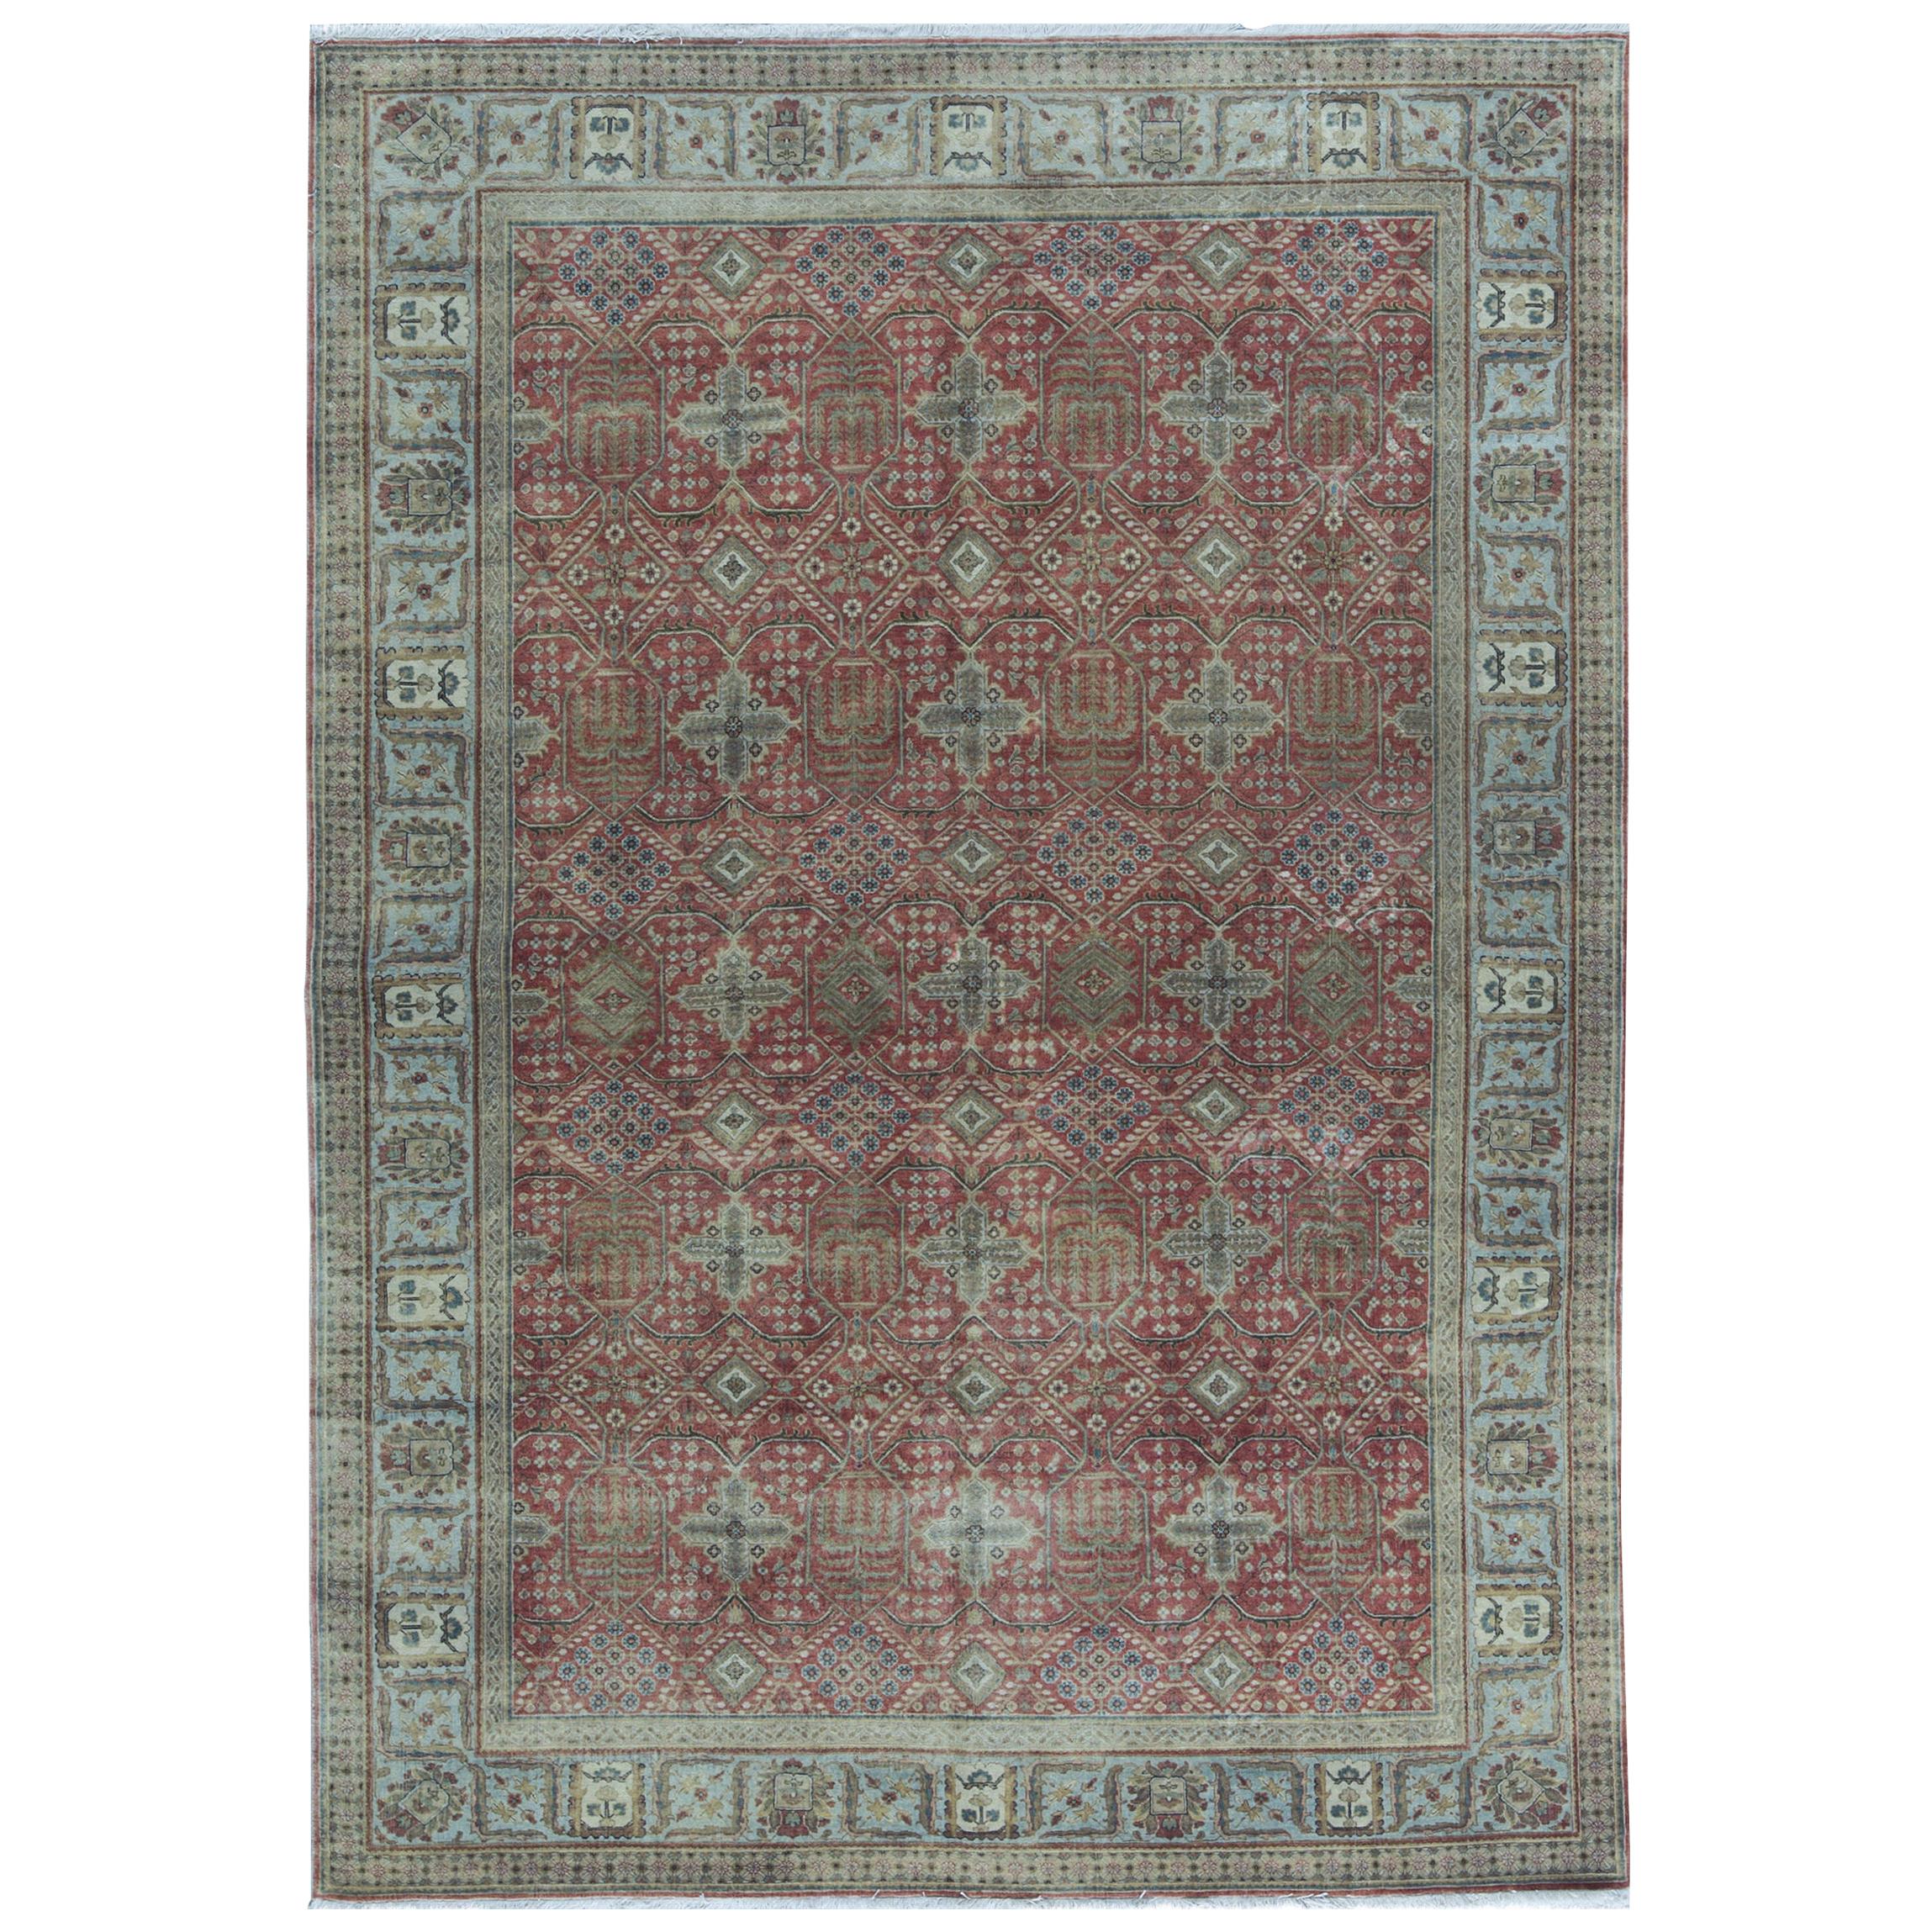 One-of-a-Kind Contemporary Handwoven Wool Area Rug 6'1 x 8'8 For Sale